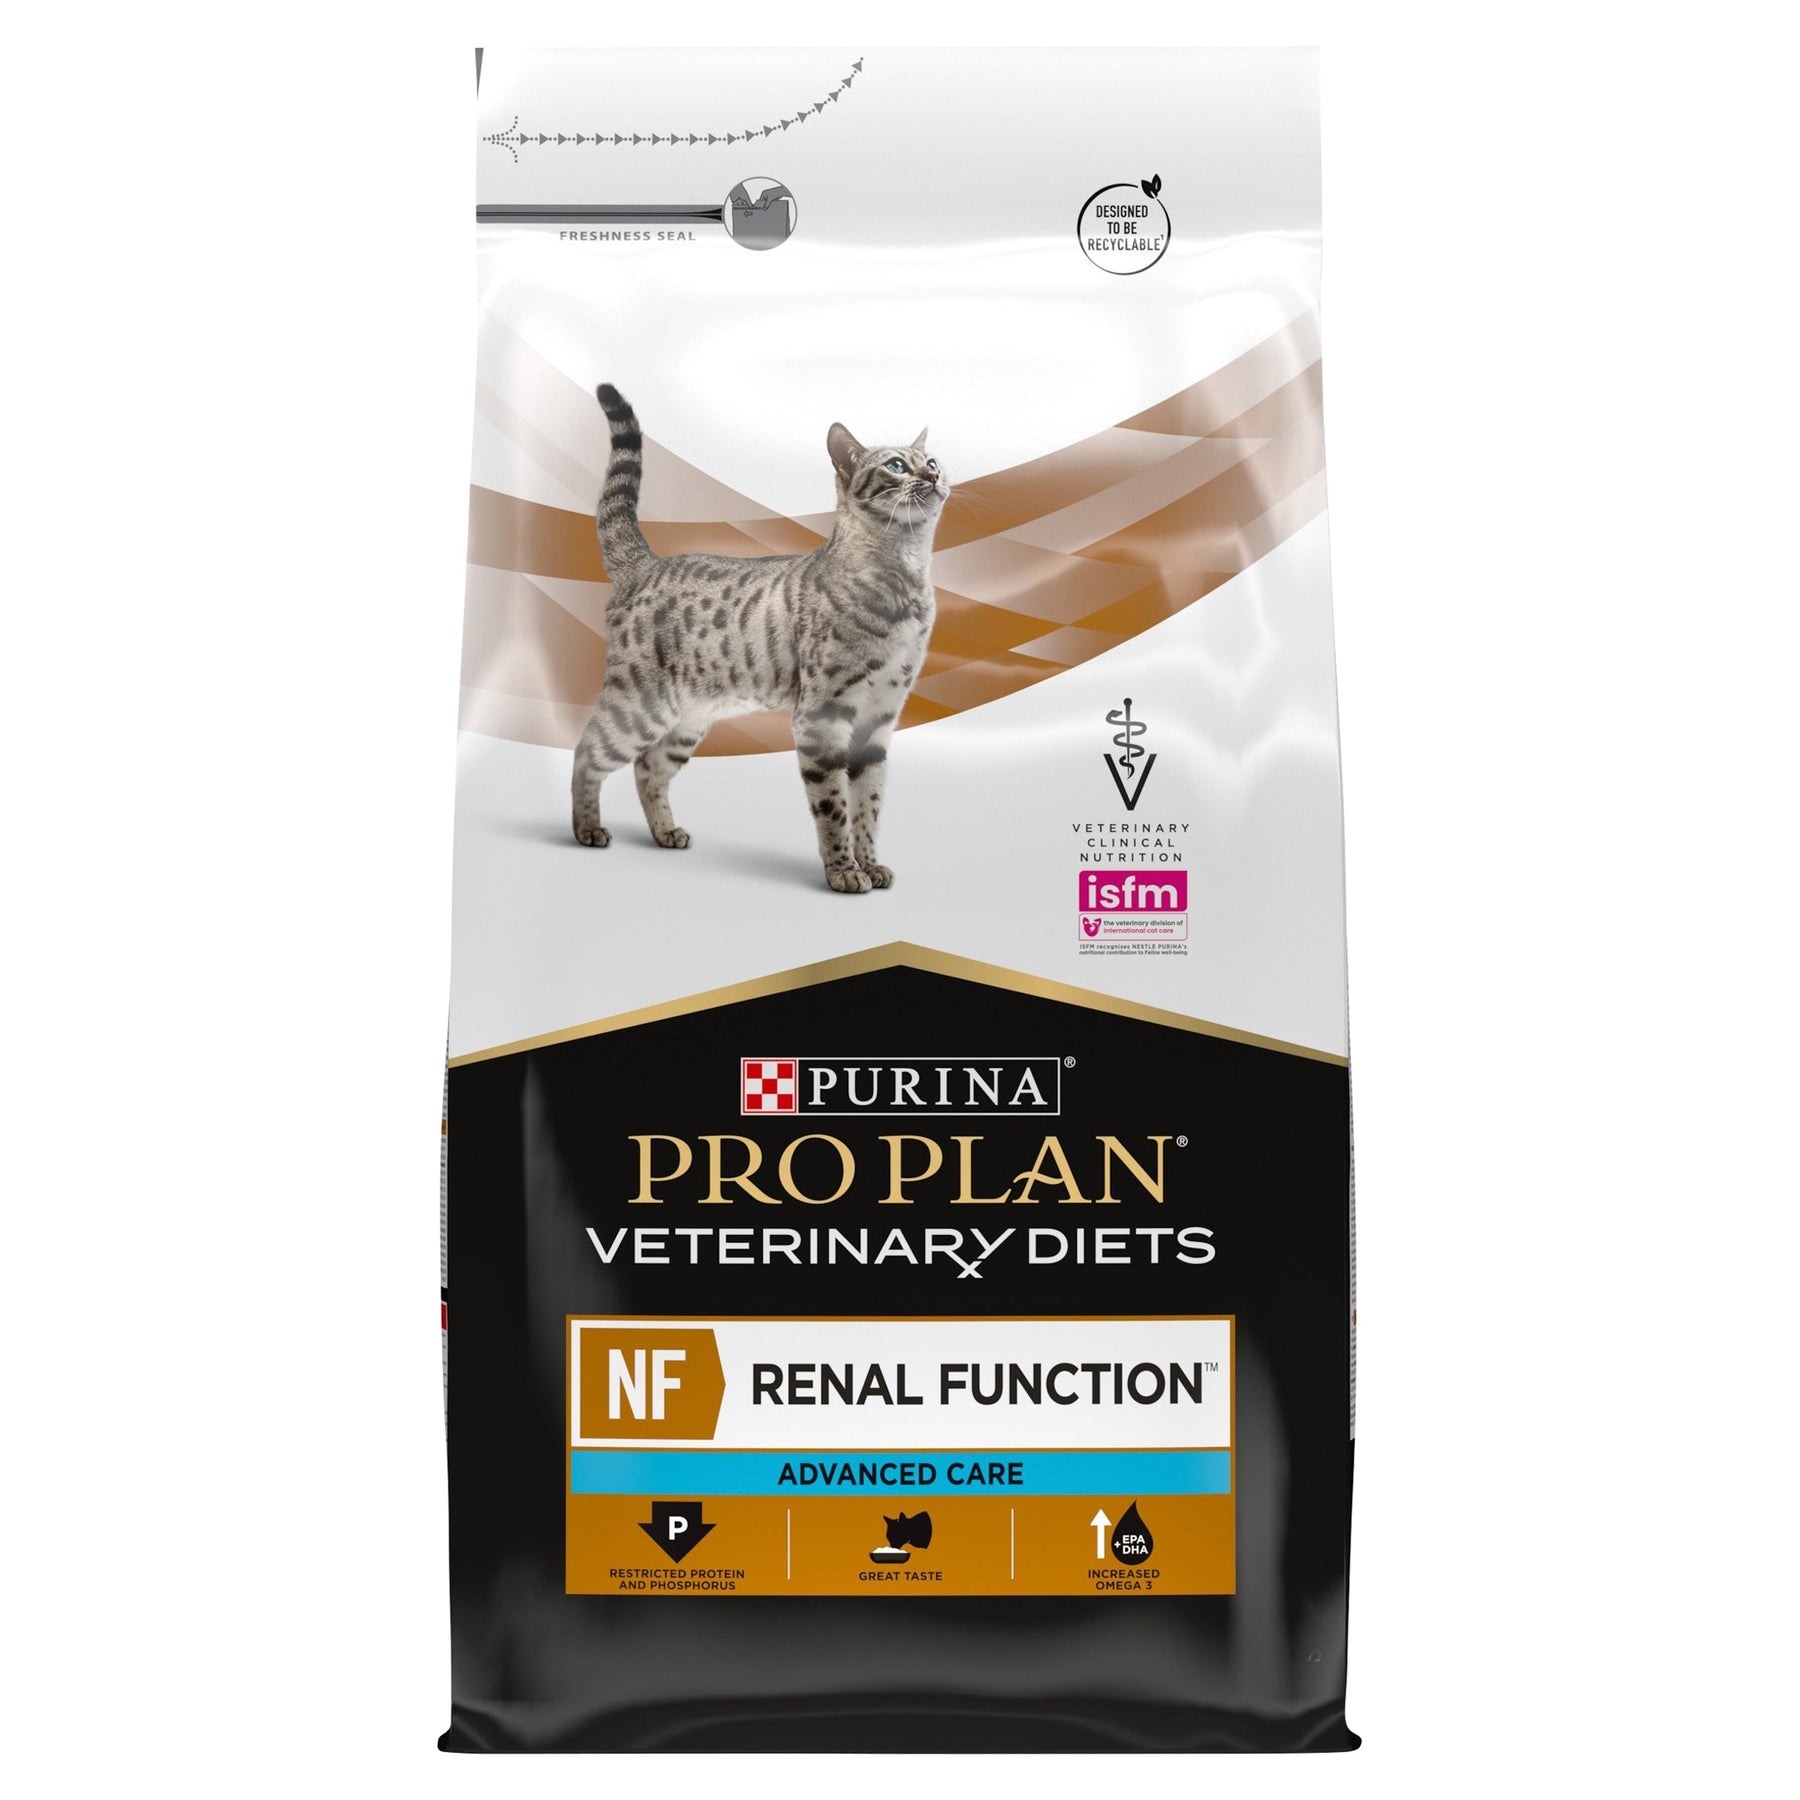 PURINA® PRO PLAN® Veterinary Diets - NF Advanced Care Renal Function kissanruoka.